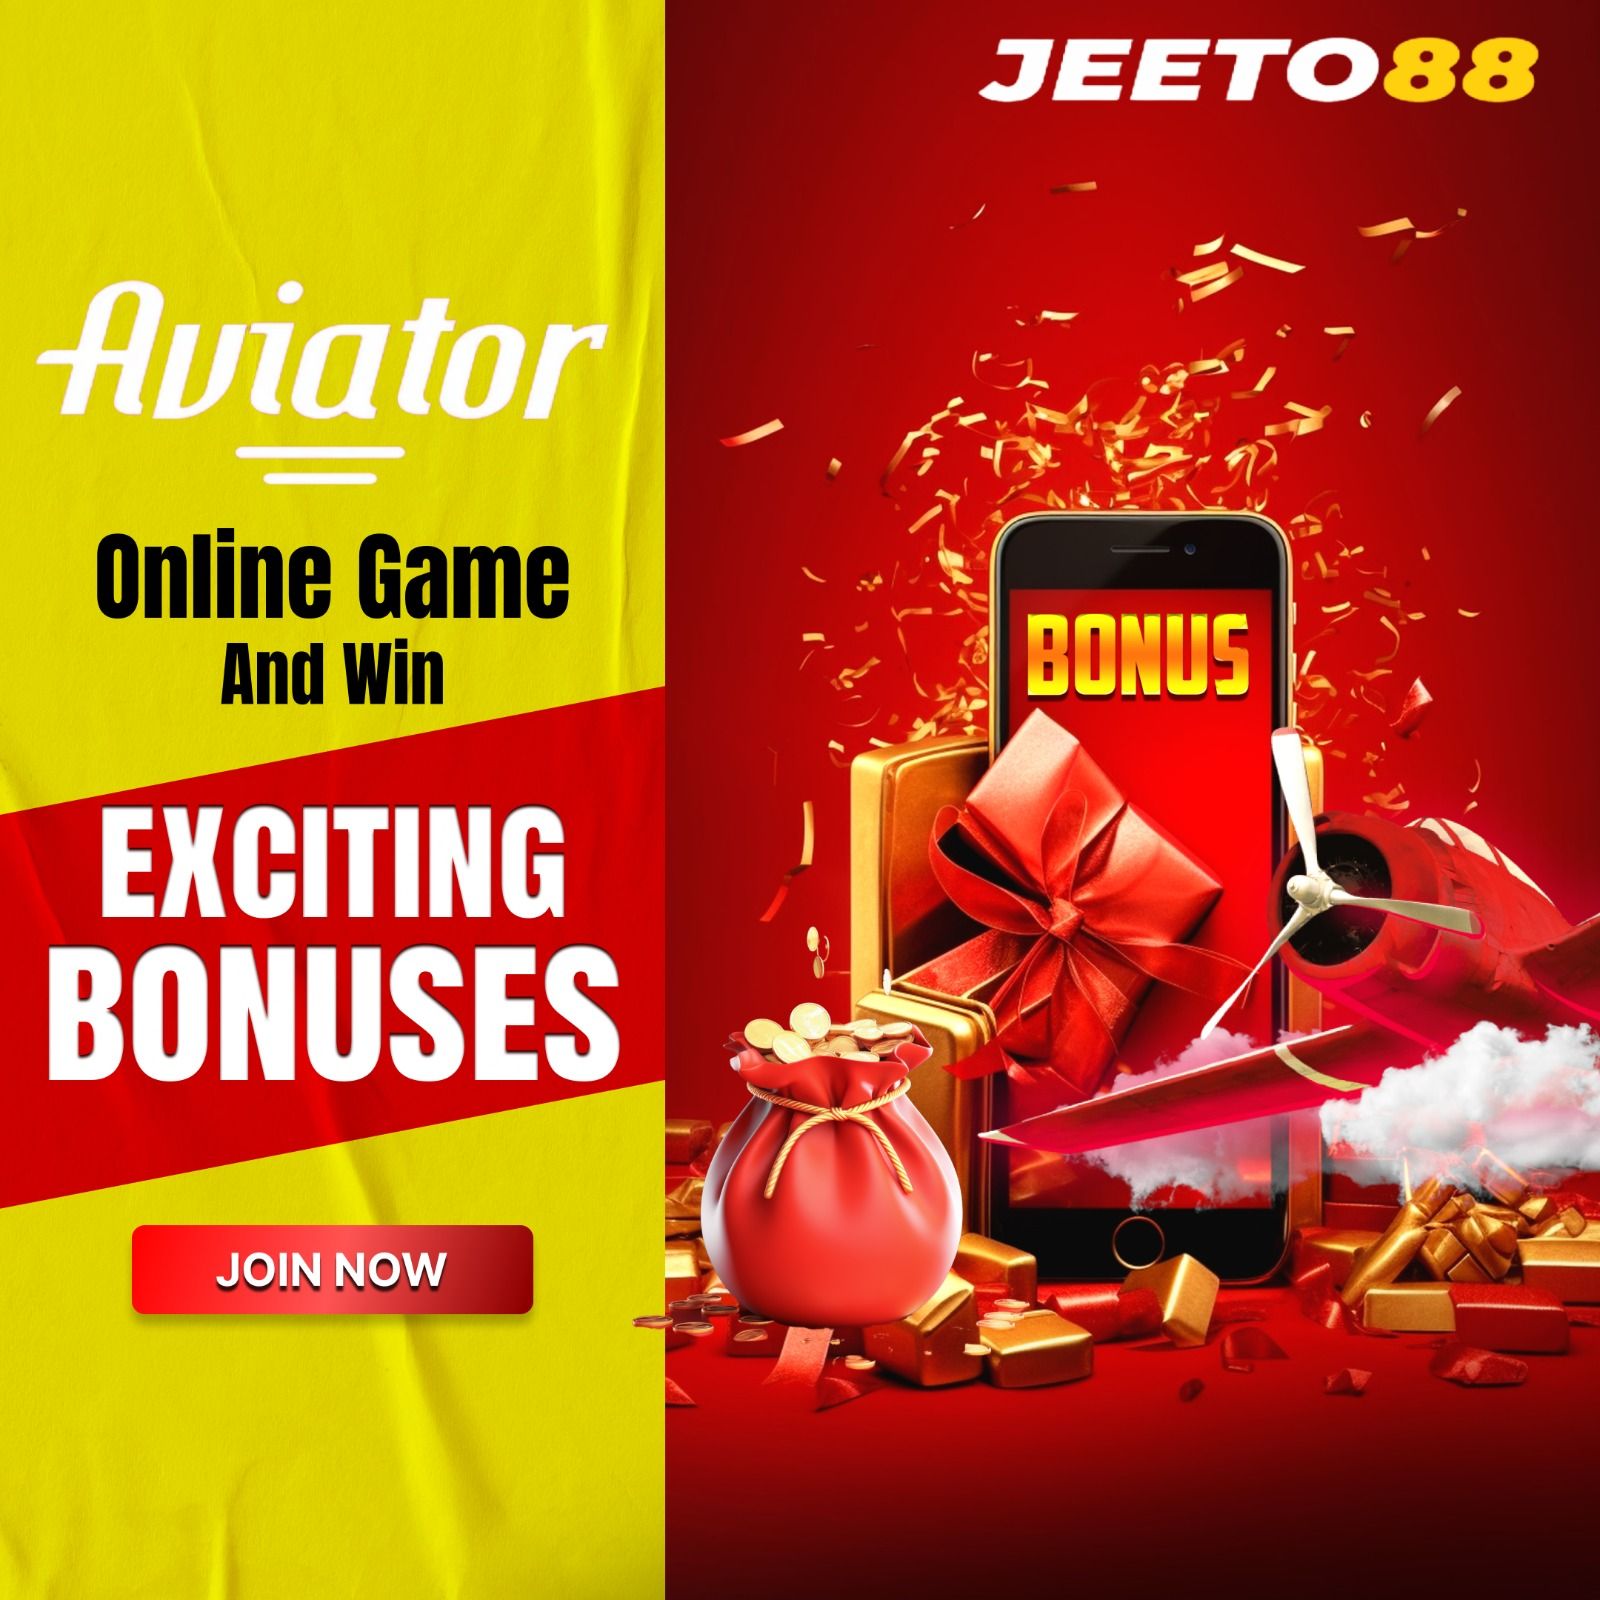 Join Jeeto88 Aviator Online Game and win exciting bonuses